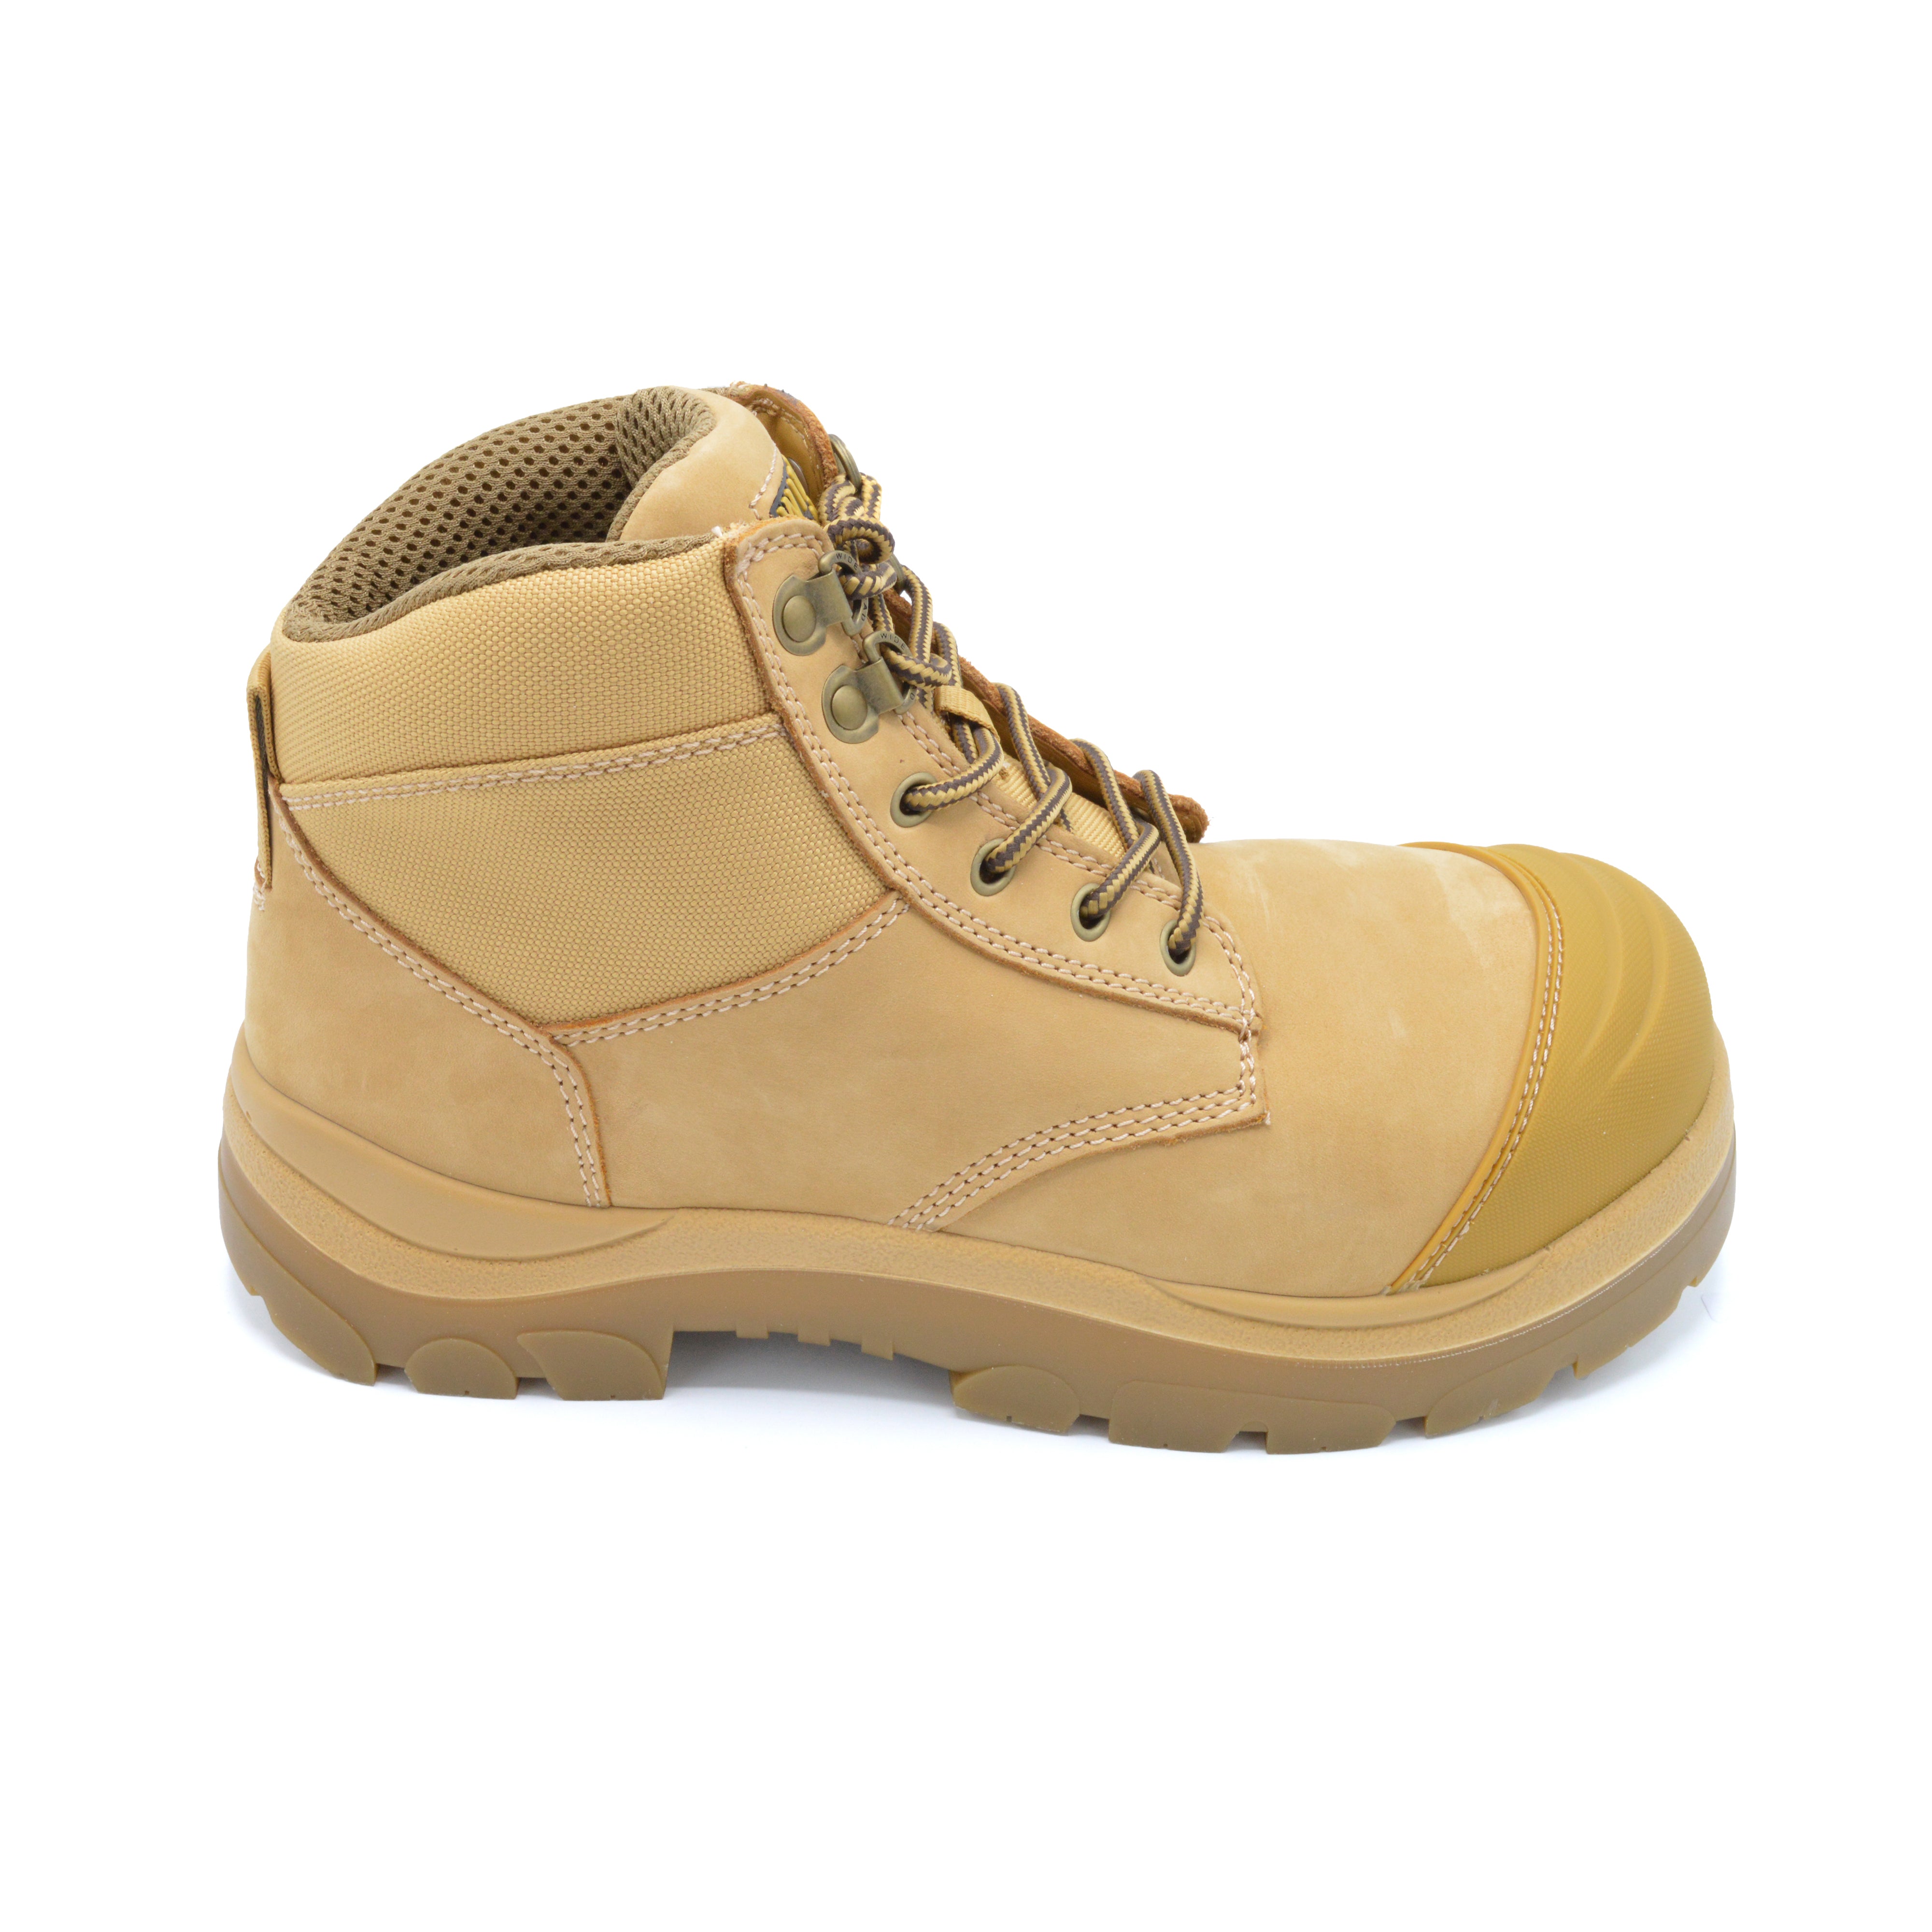 Wideload Mens Extra Wide Safety Boot